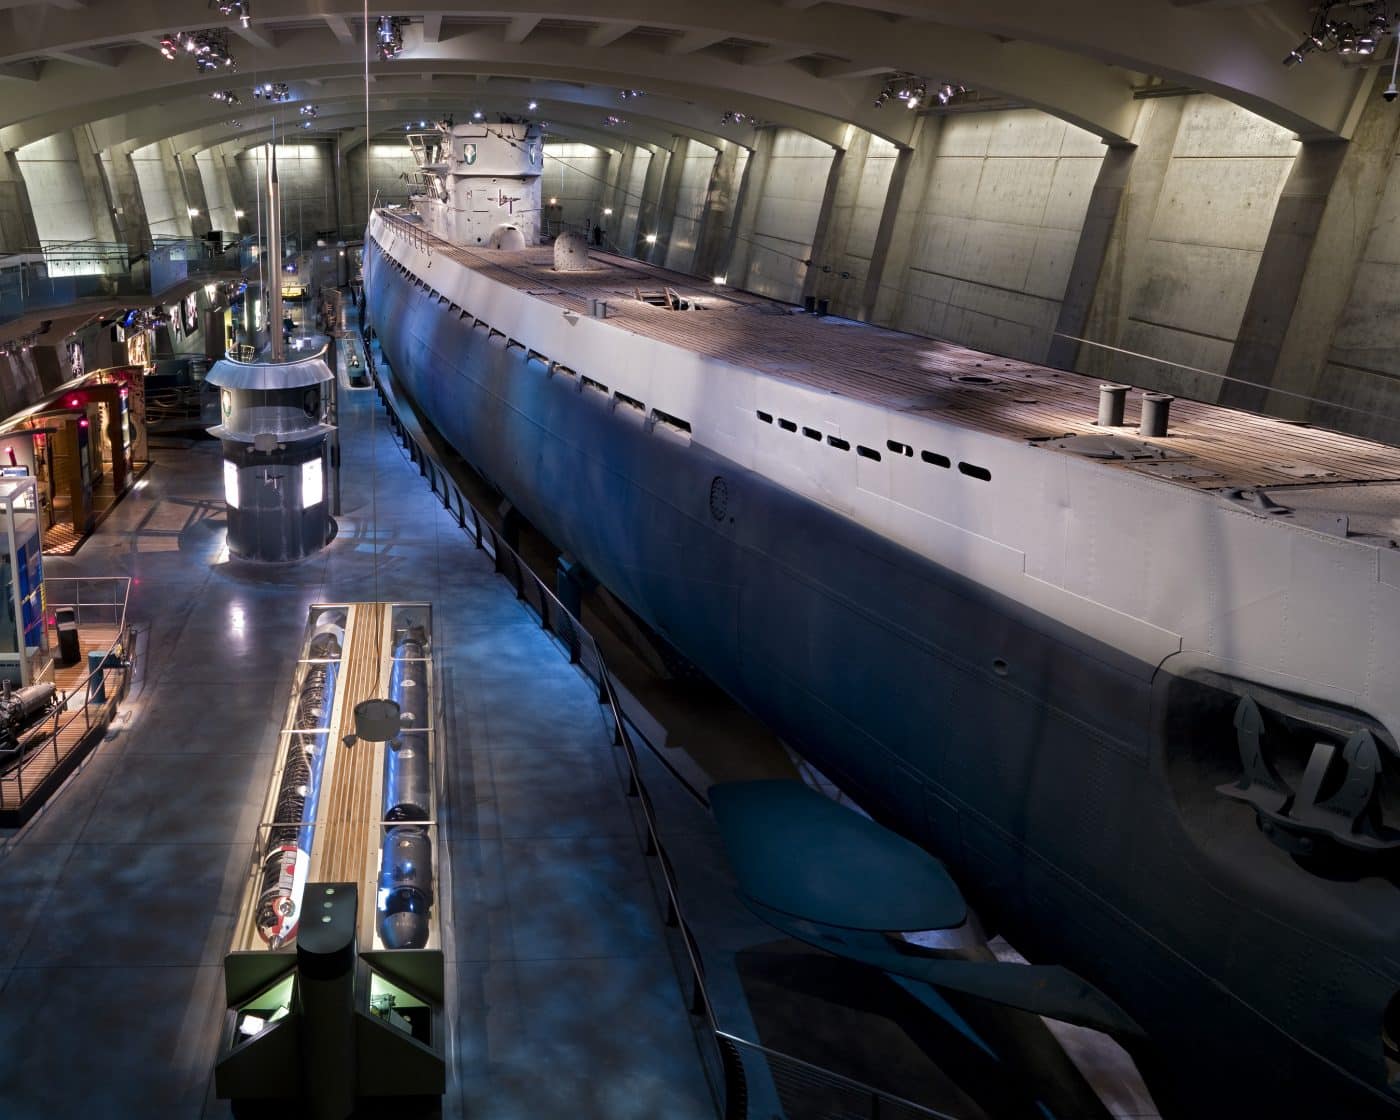 U-505 Submarine @ the Museum of Science+Industry Chicago